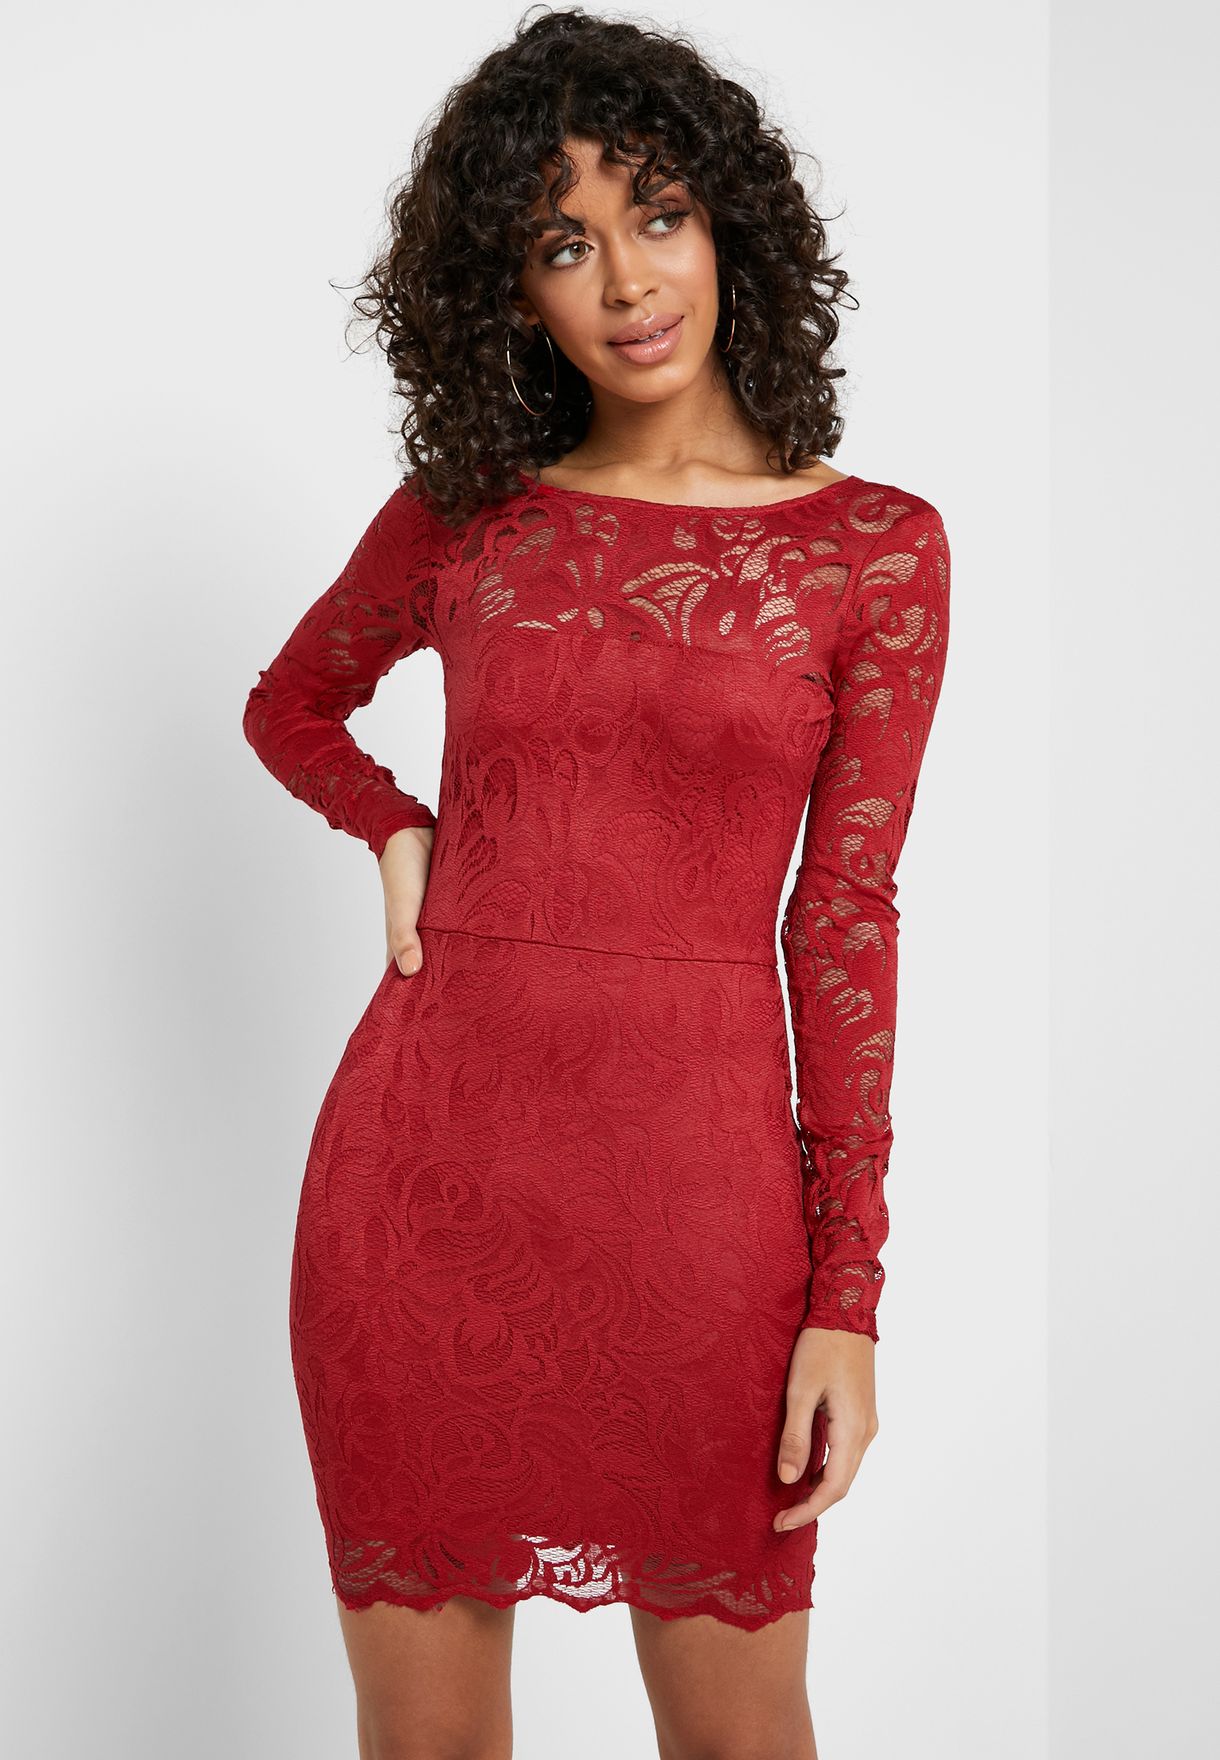 red dress with lace overlay